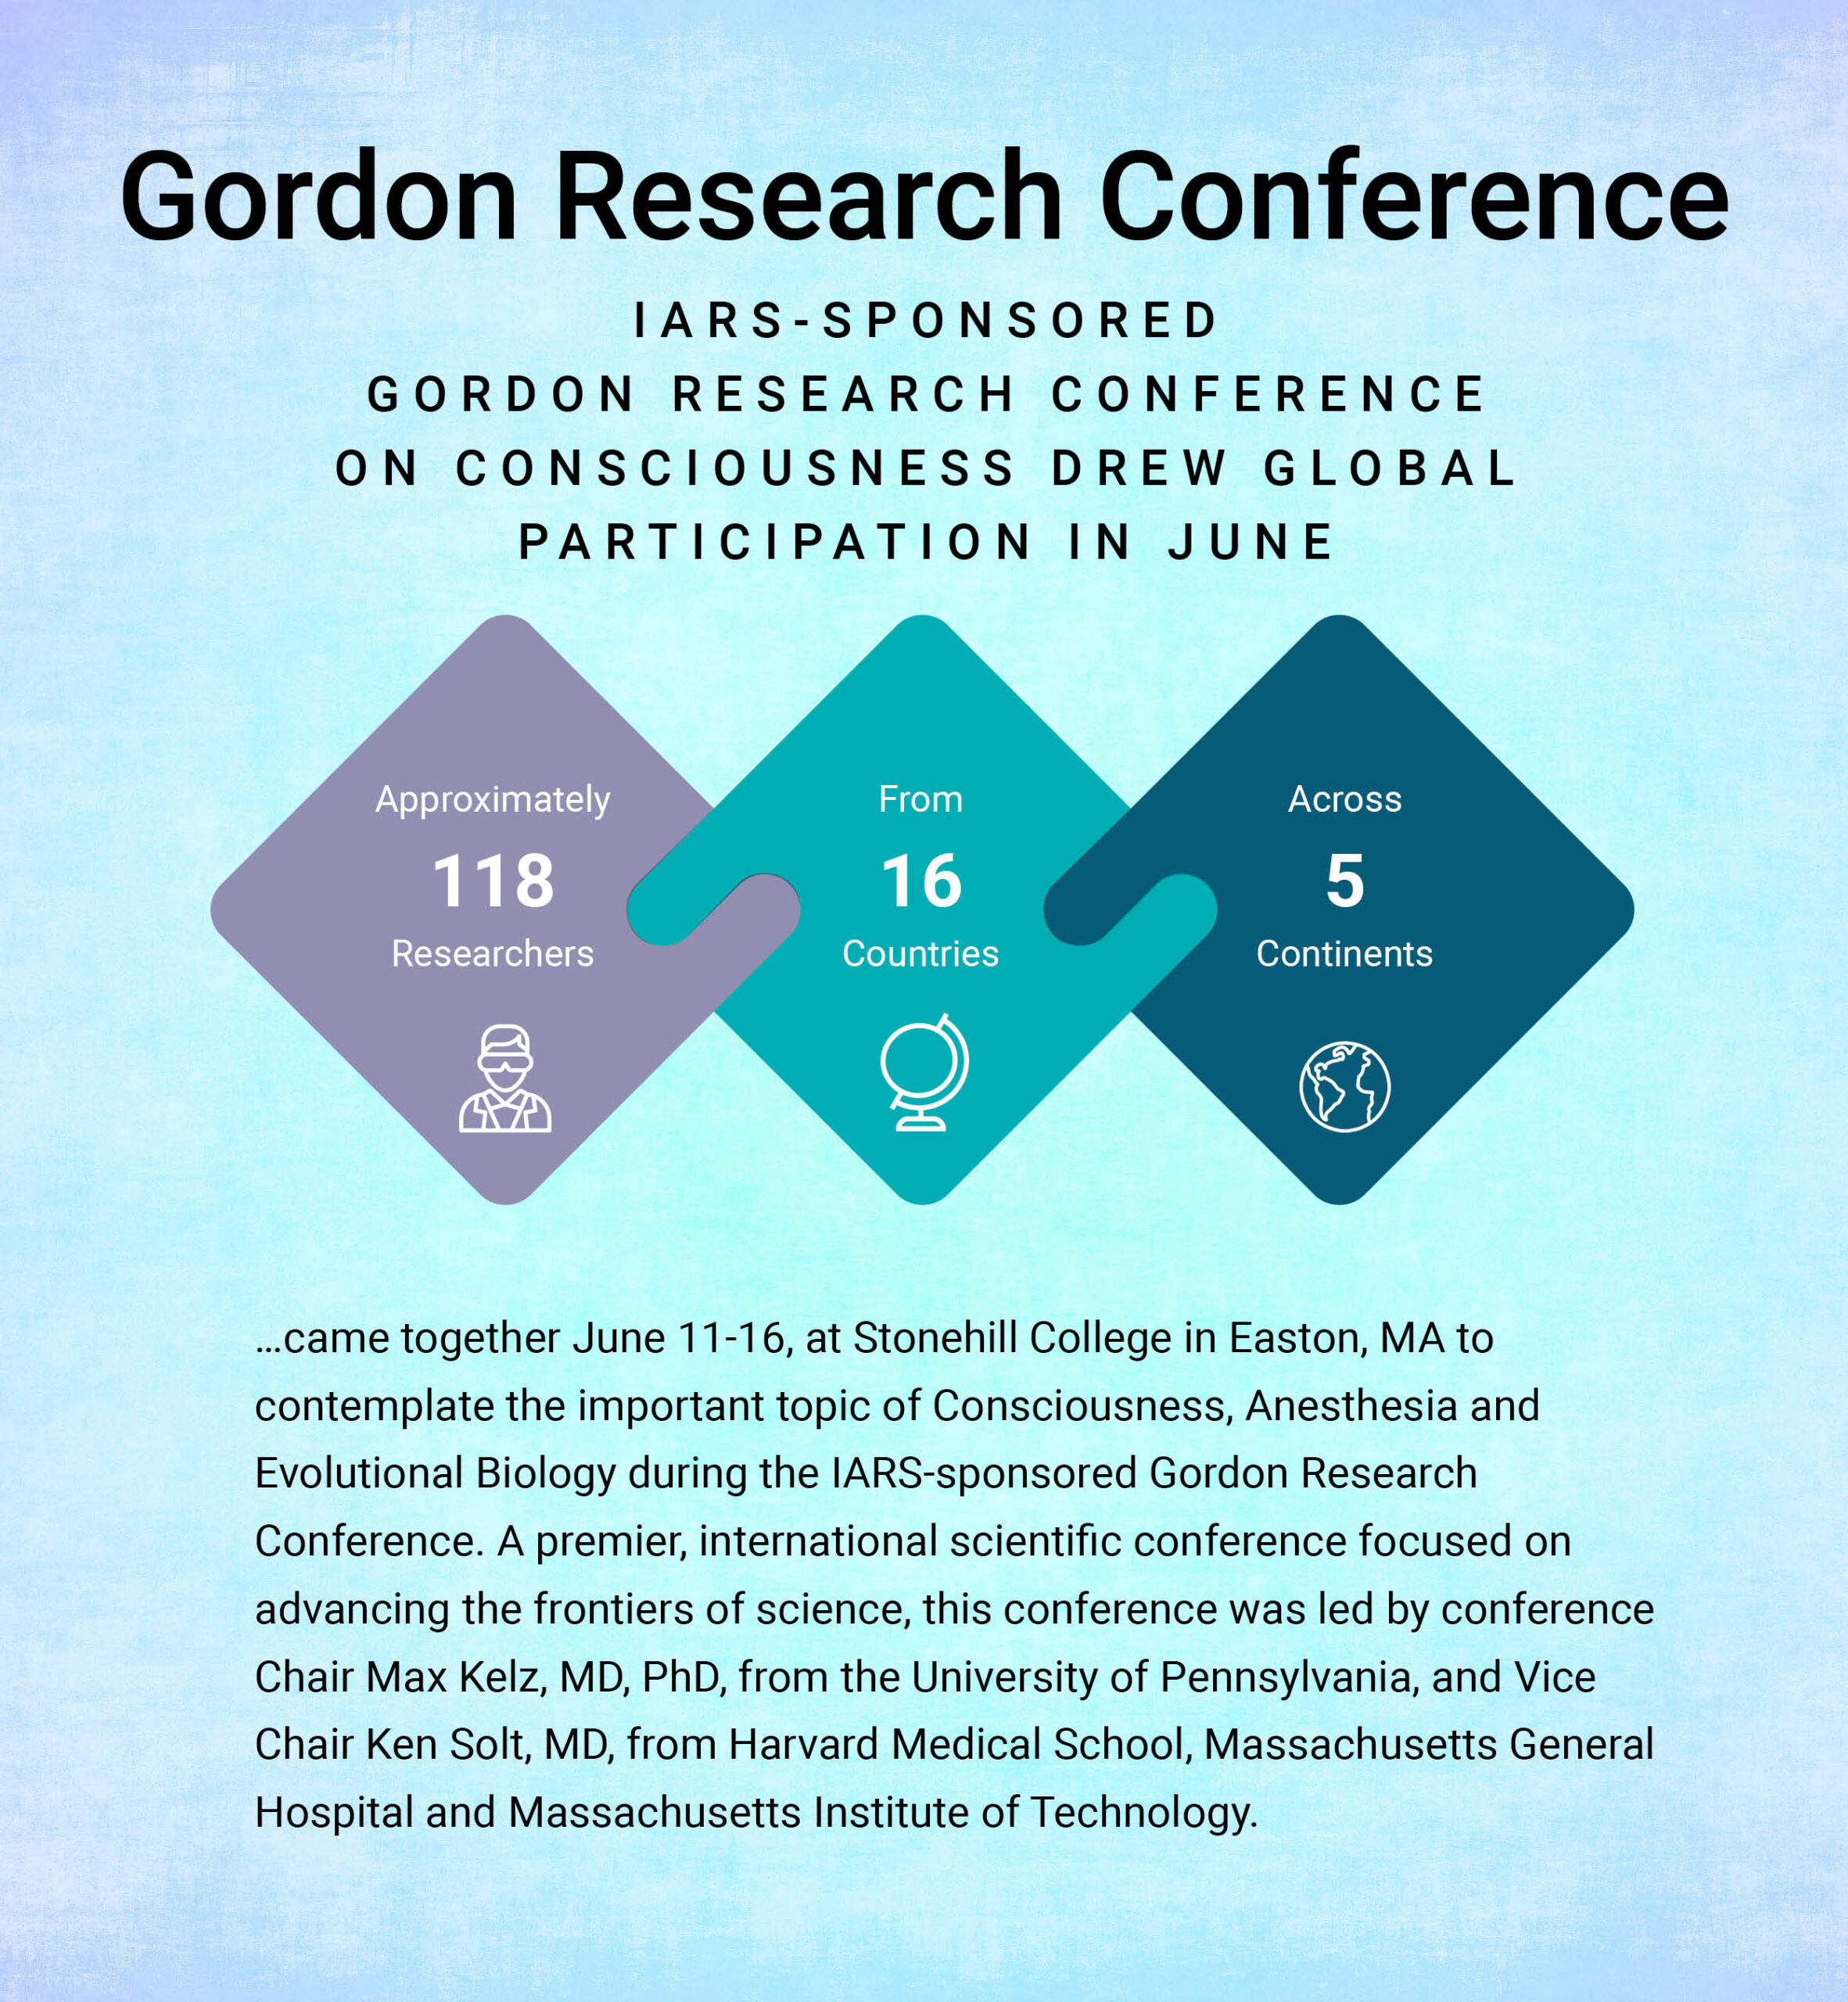 Gordon Research Conference Image